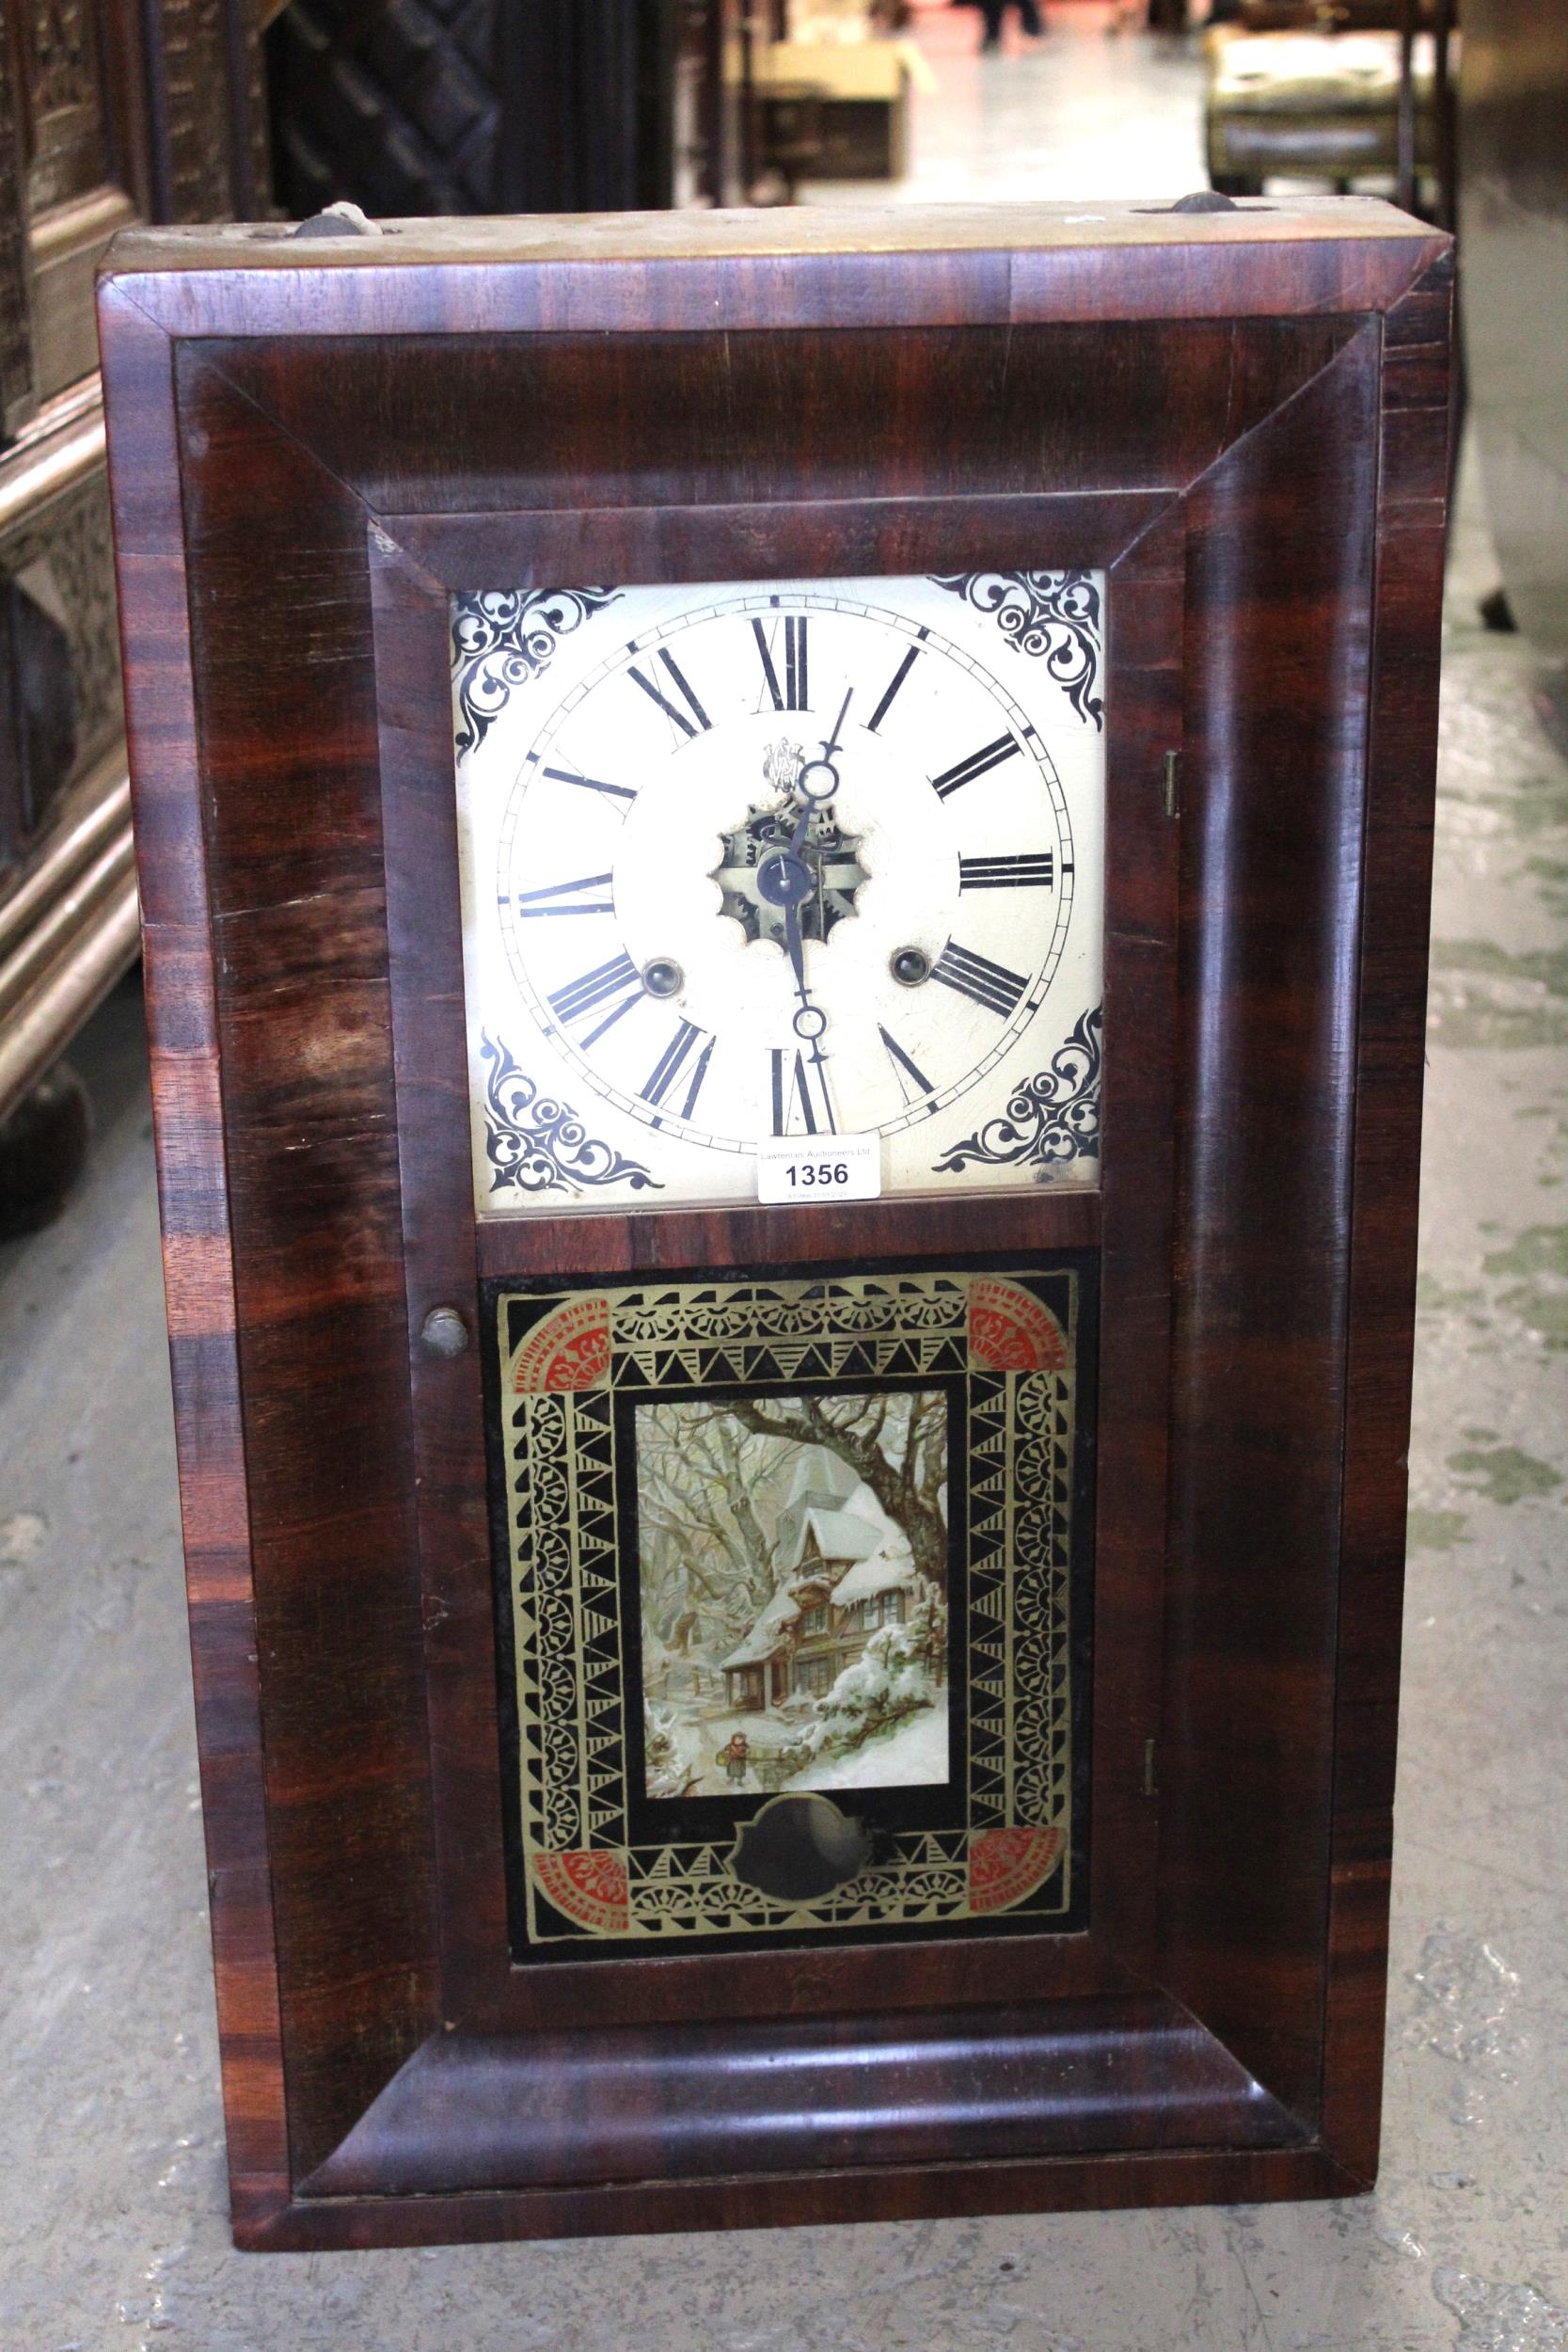 19th Century American wall clock, the mahogany ogee case with verre eglomise door, the painted